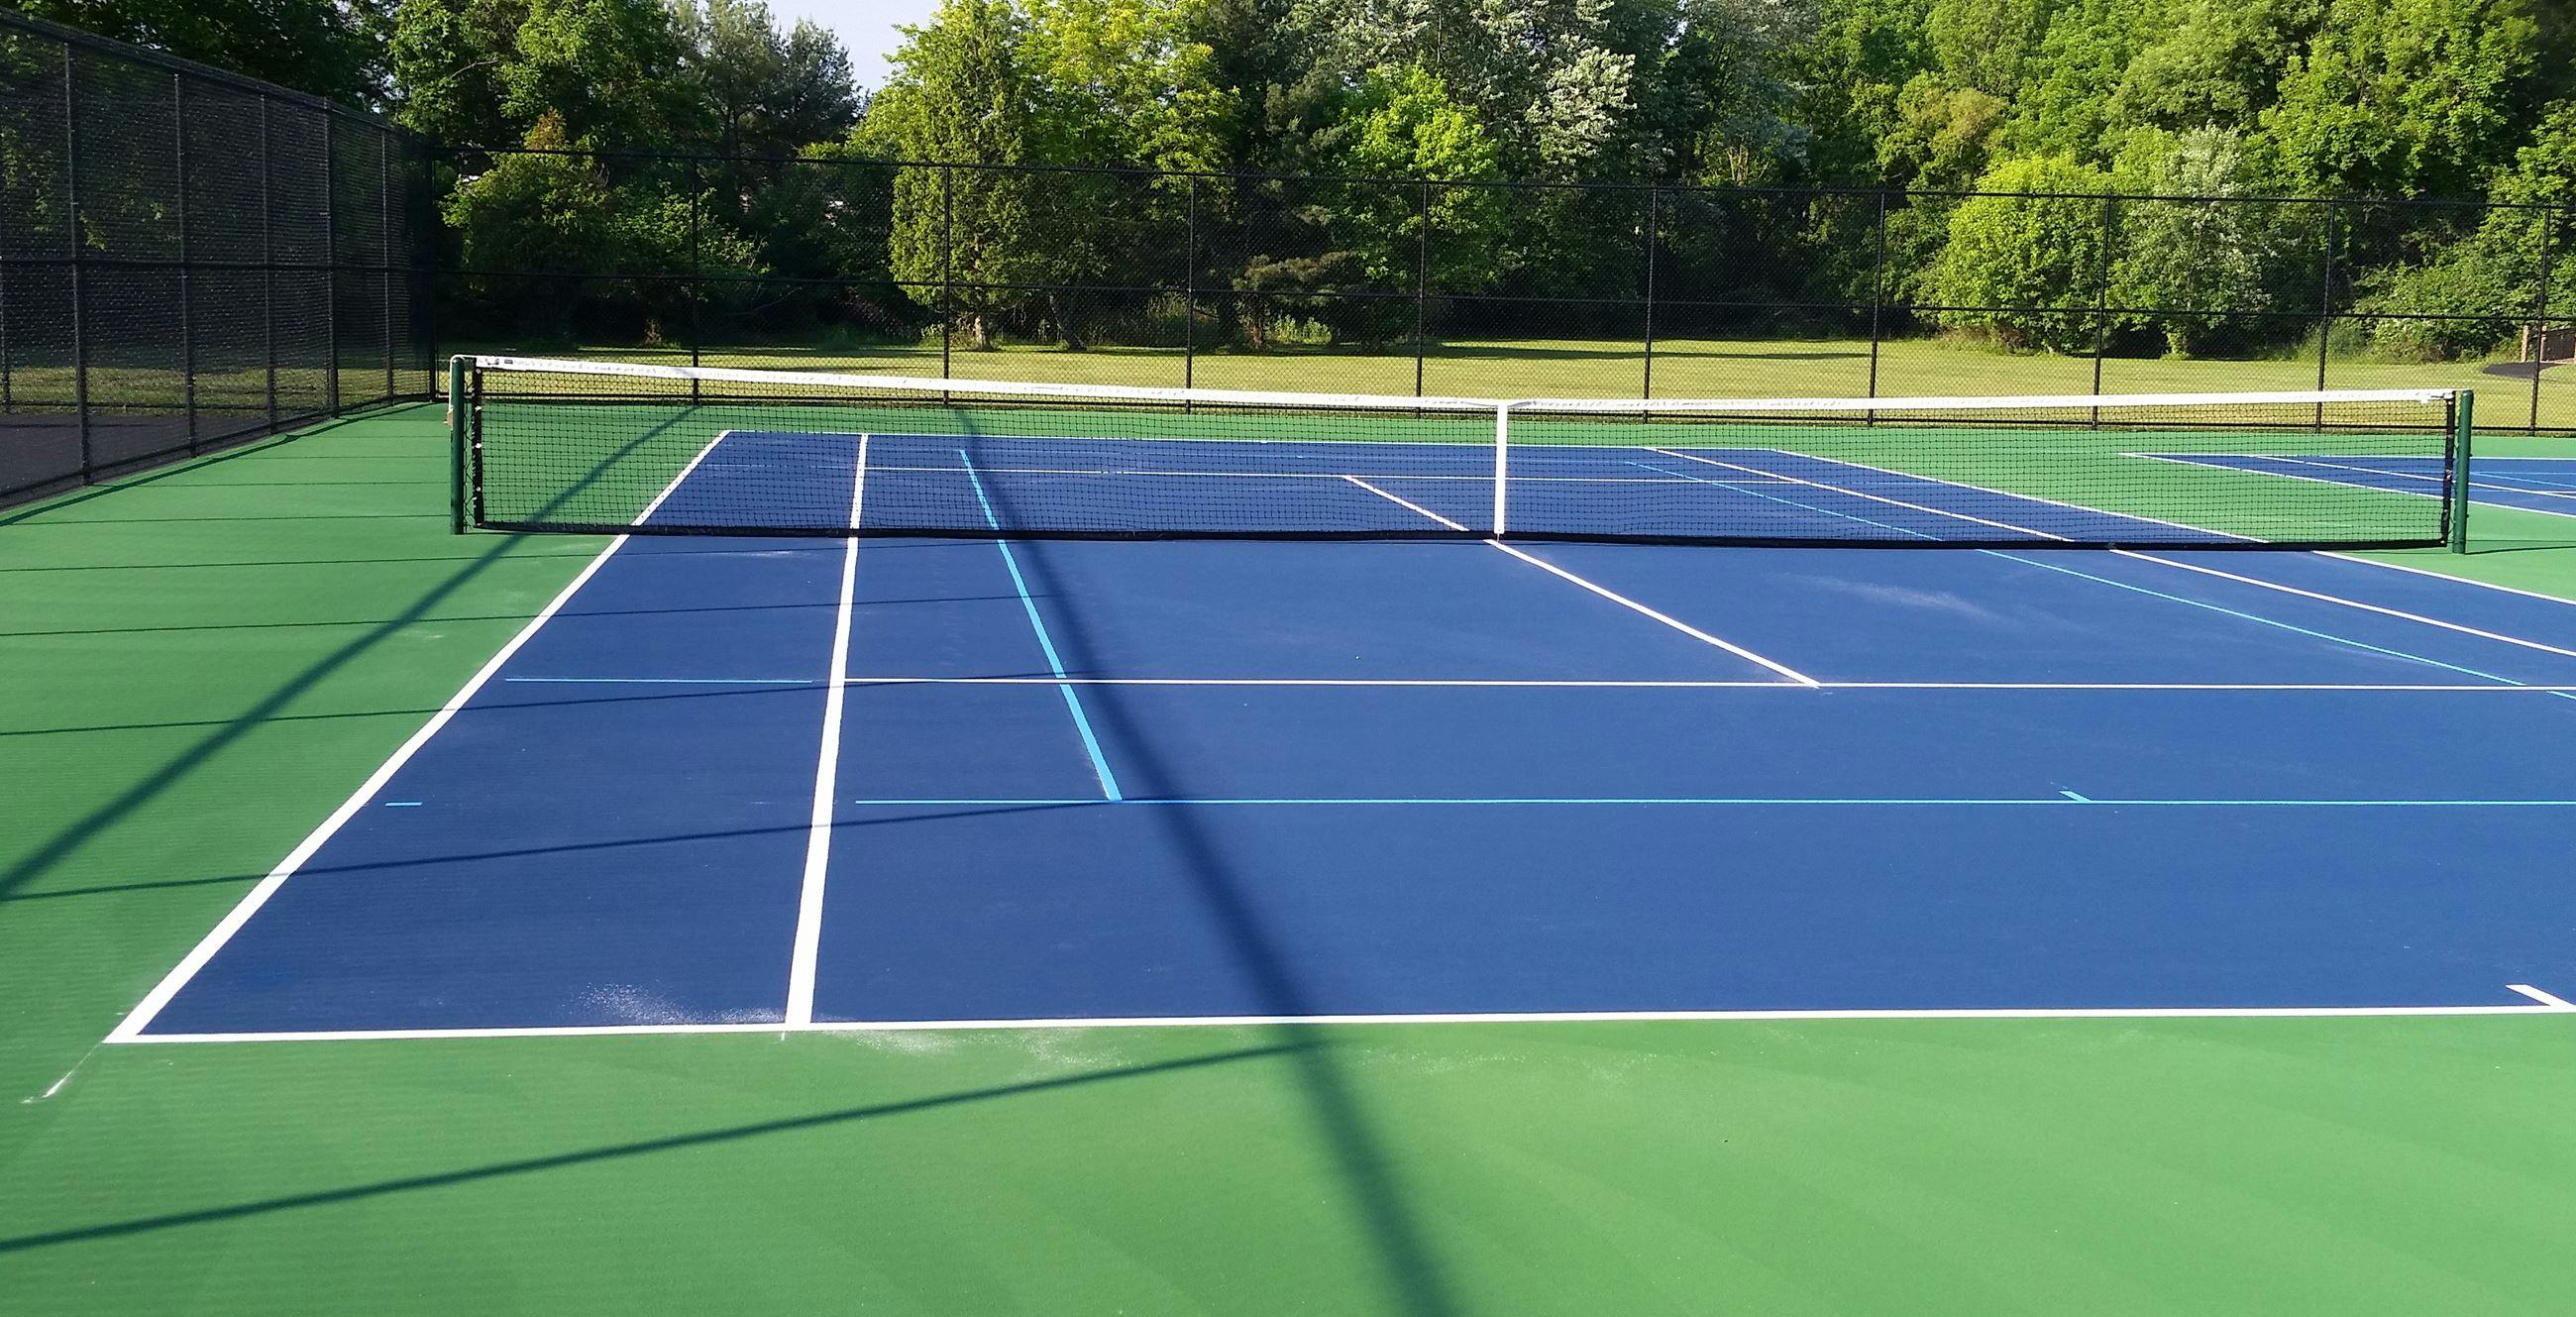 Image 1 of 2 of Miller Drive Park court